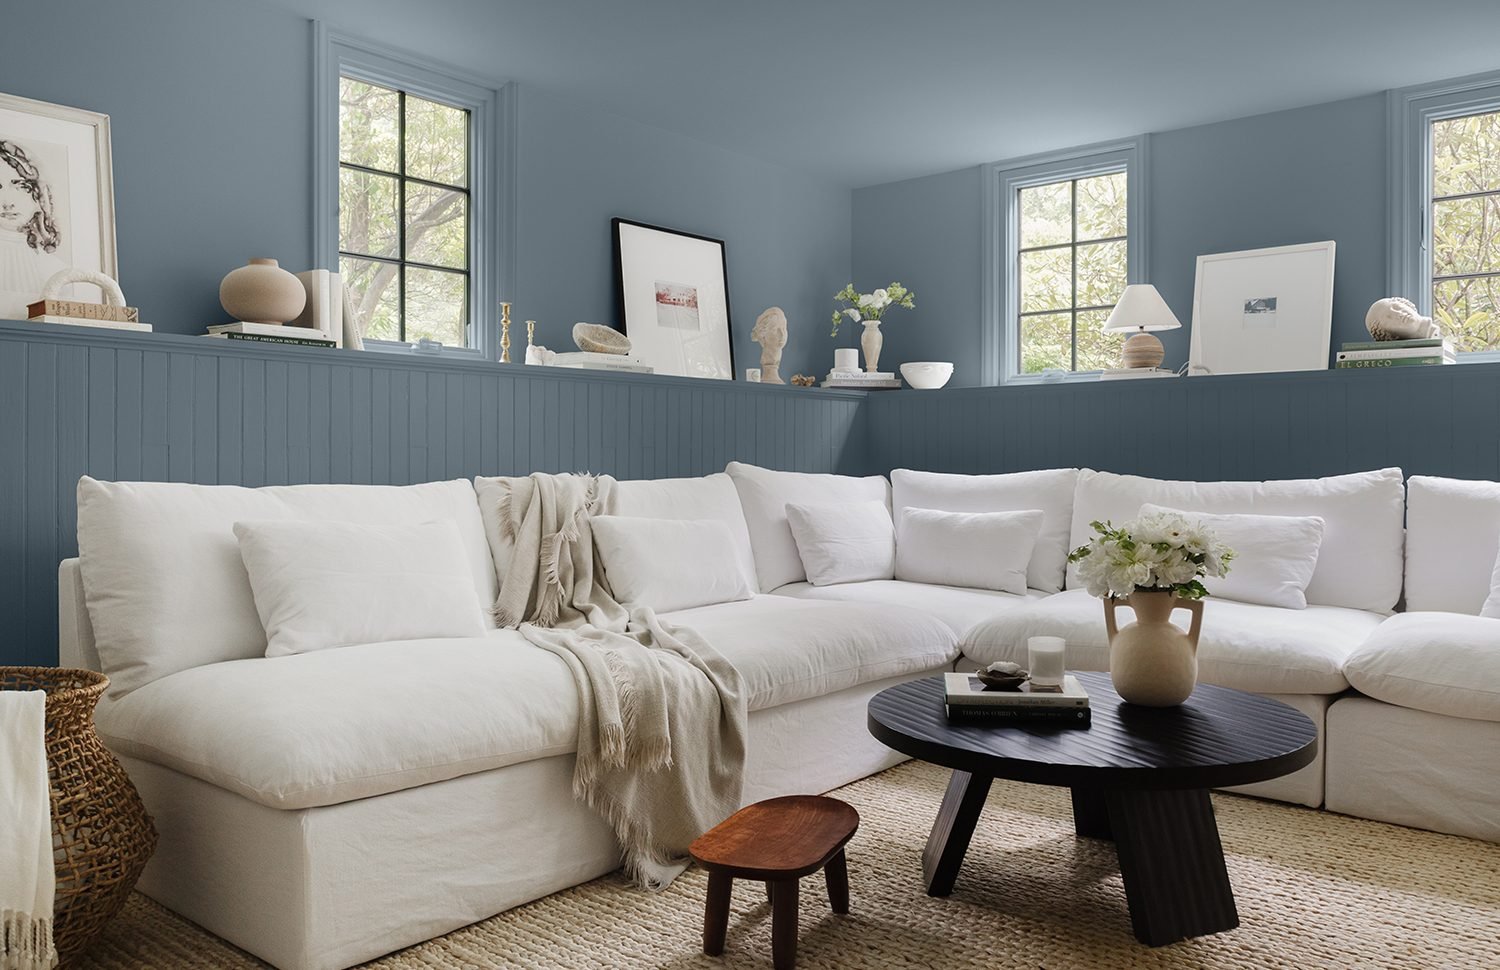 The Best Trim Colors for Painting the Home, Inside & Out